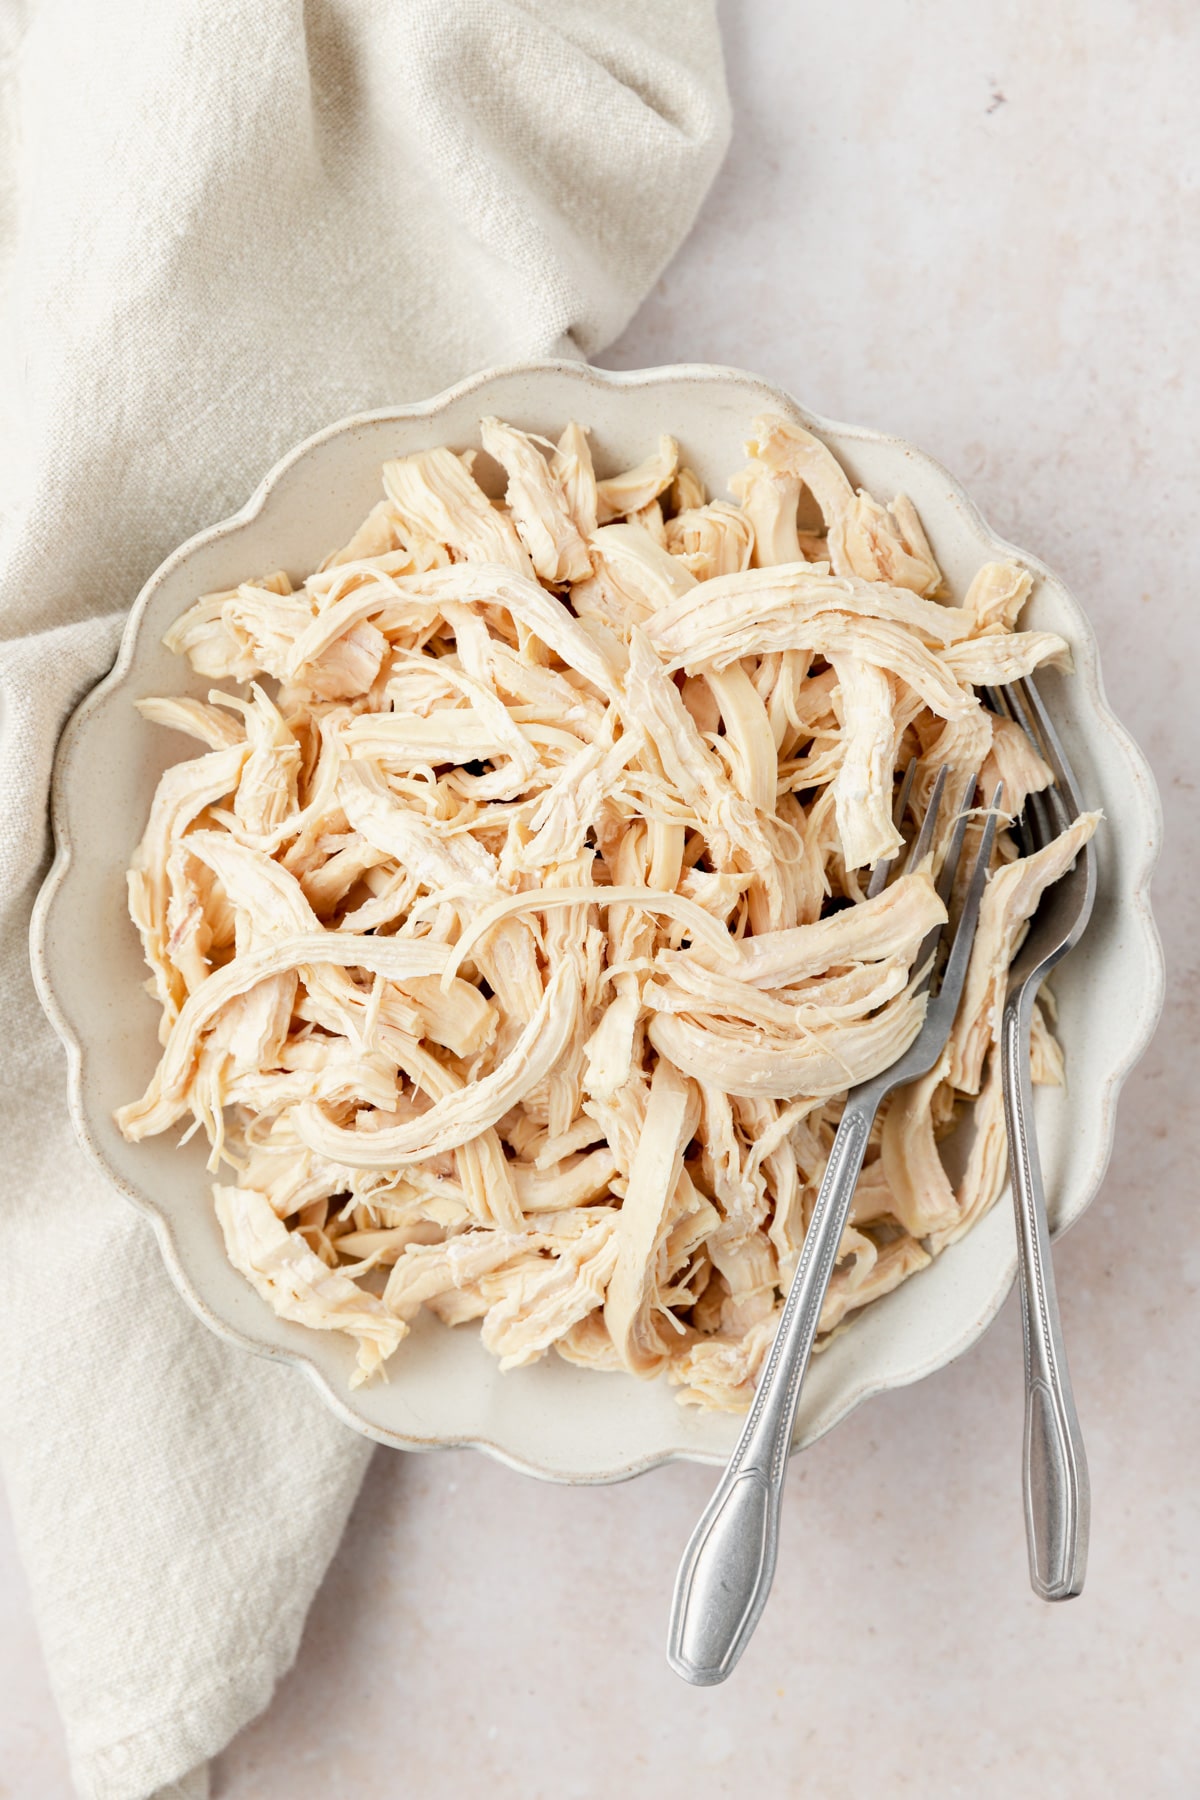 shredded poached chicken in bowl